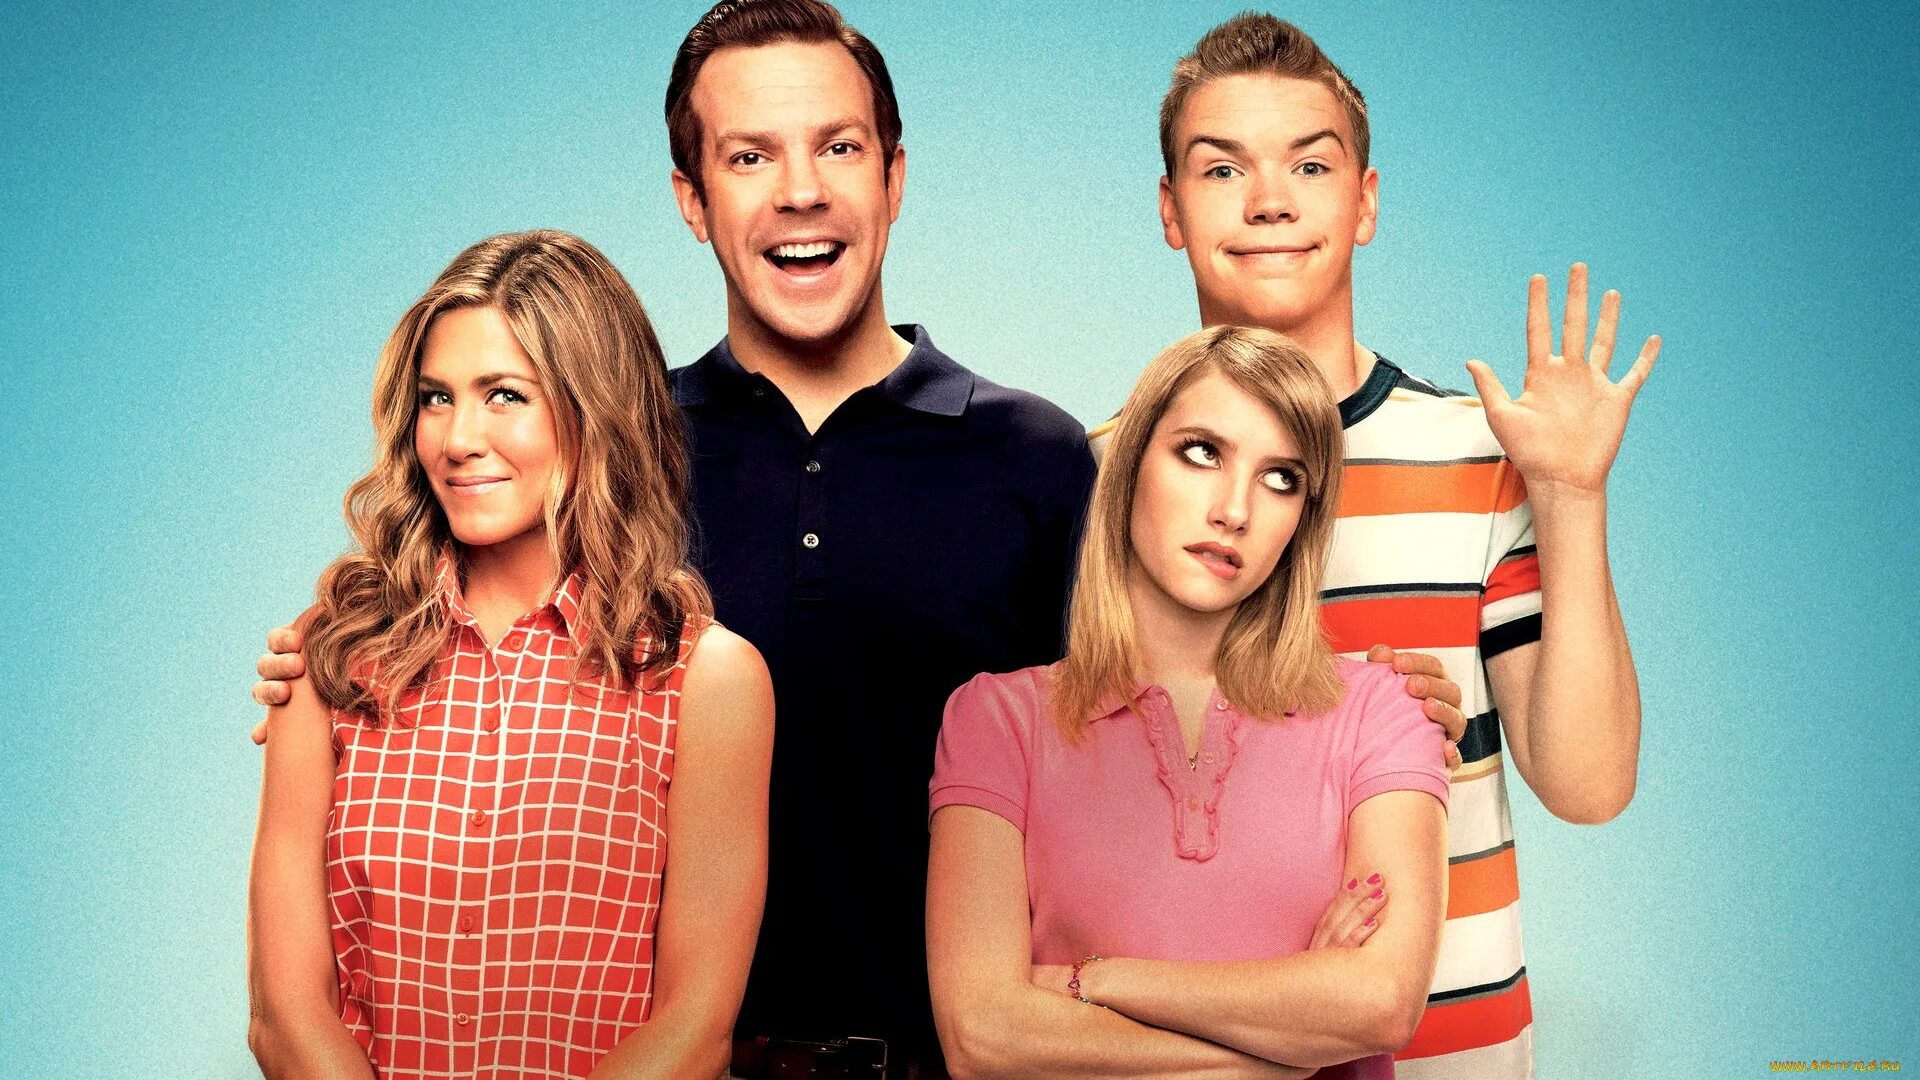 Мы - Миллеры - we re the Millers (2013). Кэтрин Хан мы Миллеры. Мы Миллеры 2. We re the world